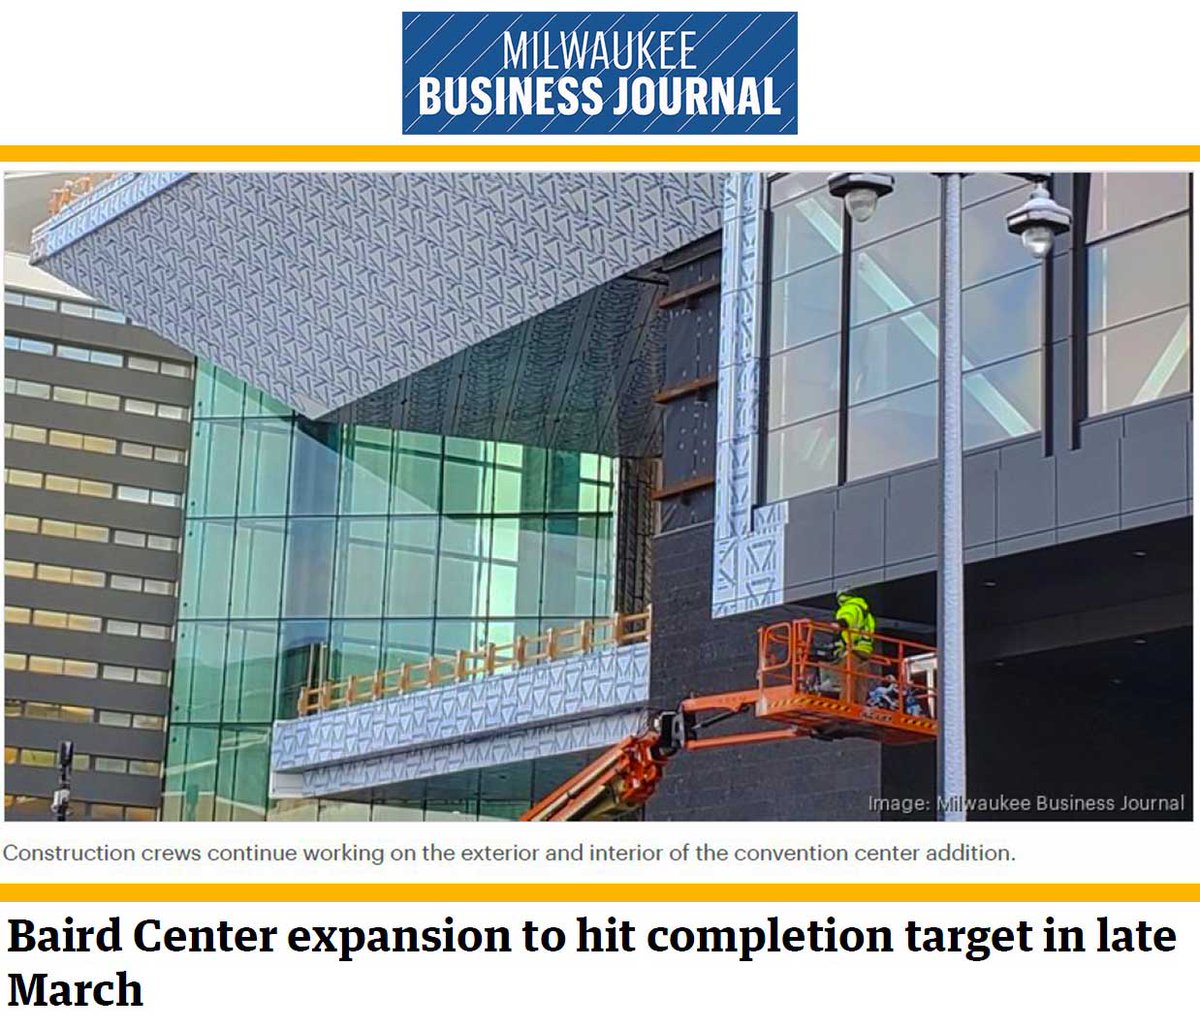 📣 The $456-million expansion of the Baird Center exceeds expectations as it nears completion. 🏗 Construction is on track for substantial completion by late March: cdsmith.com/wisconsin-cent… #milwaukee #construction #wisconsin #buildingmore